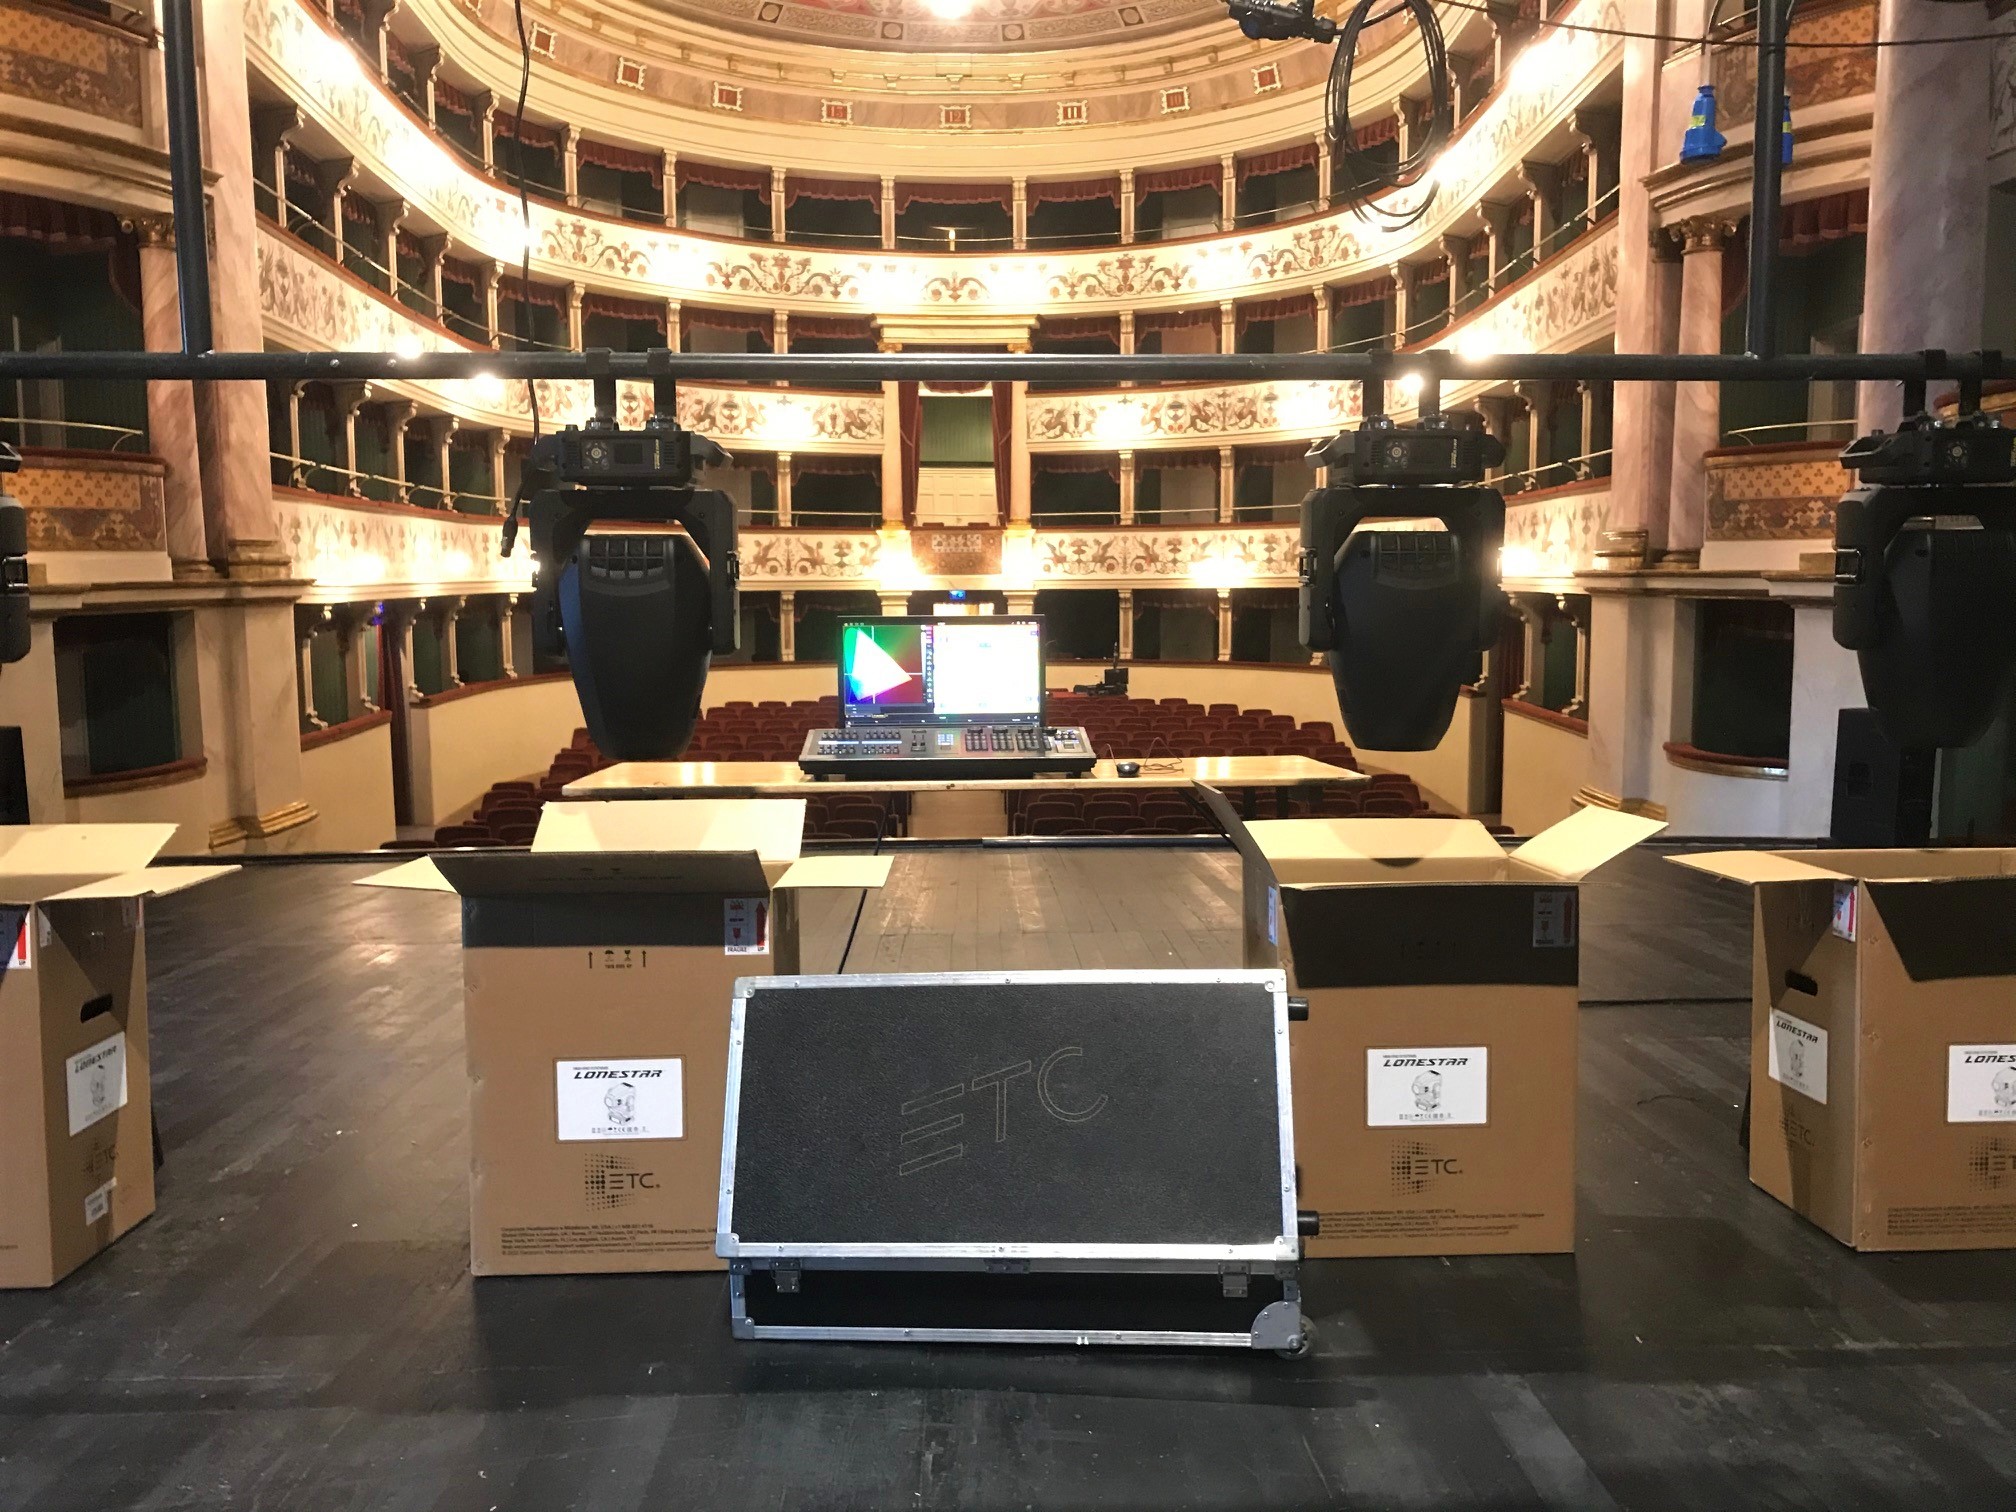 Teatri di Siena upgrades to energy-efficient lighting solution with ETC